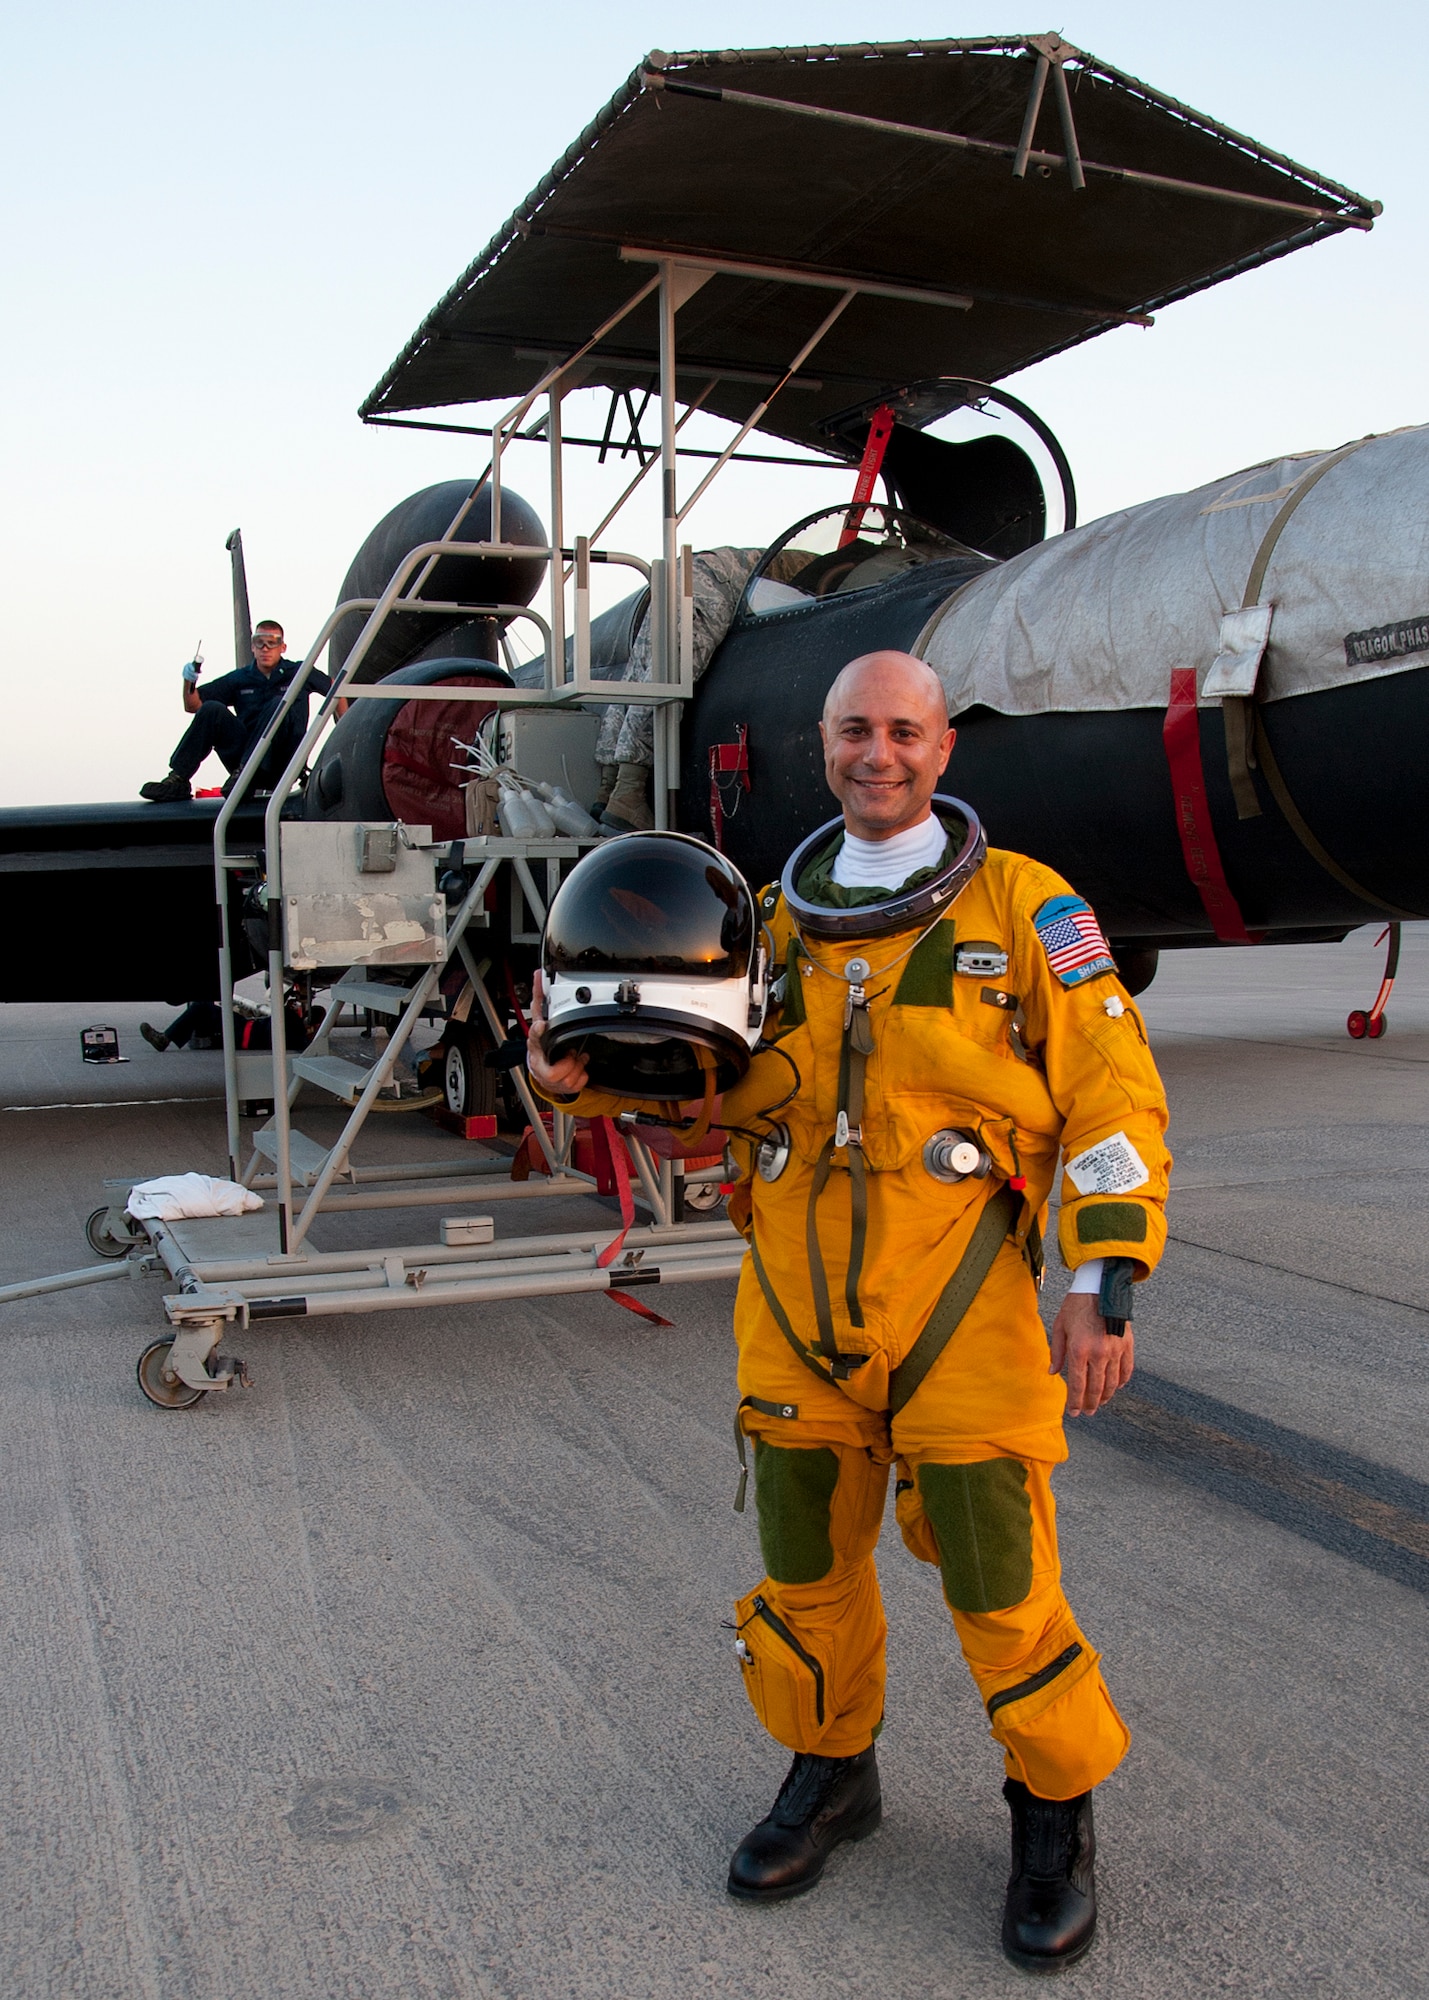 Air Force Maj. Ralph Shoukry, a pilot and tactics and employment lead assigned to the 99th Expeditionary Reconnaissance Squadron, poses for a photo in front of a U-2 Dragonlady at an undisclosed location in Southwest Asia, March 6, 2014. Shoukry just passed more than 1,000 combat flying hours. (U.S. Air Force photo by Staff Sgt. Michael Means/Released)